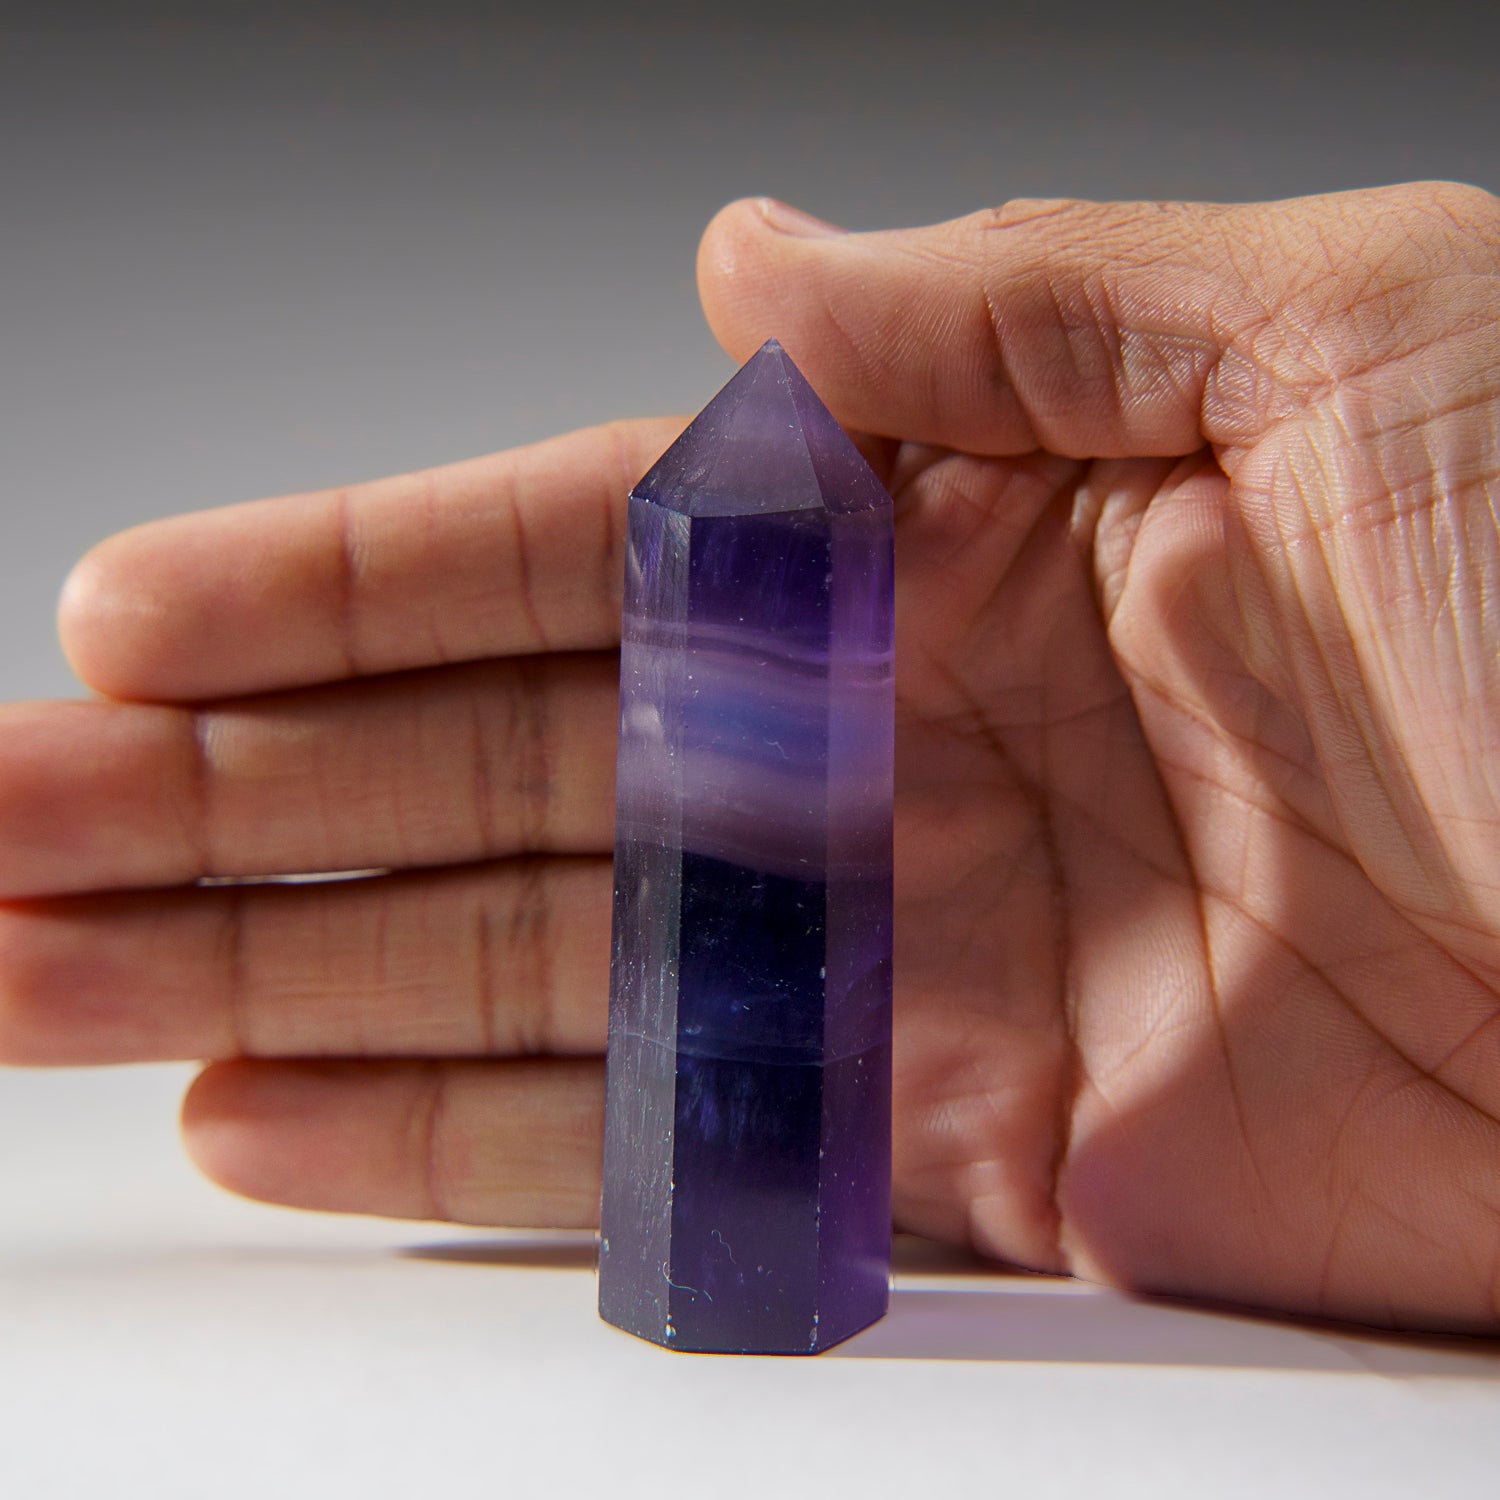 Genuine Polished Purple Fluorite Point from China (99 grams)